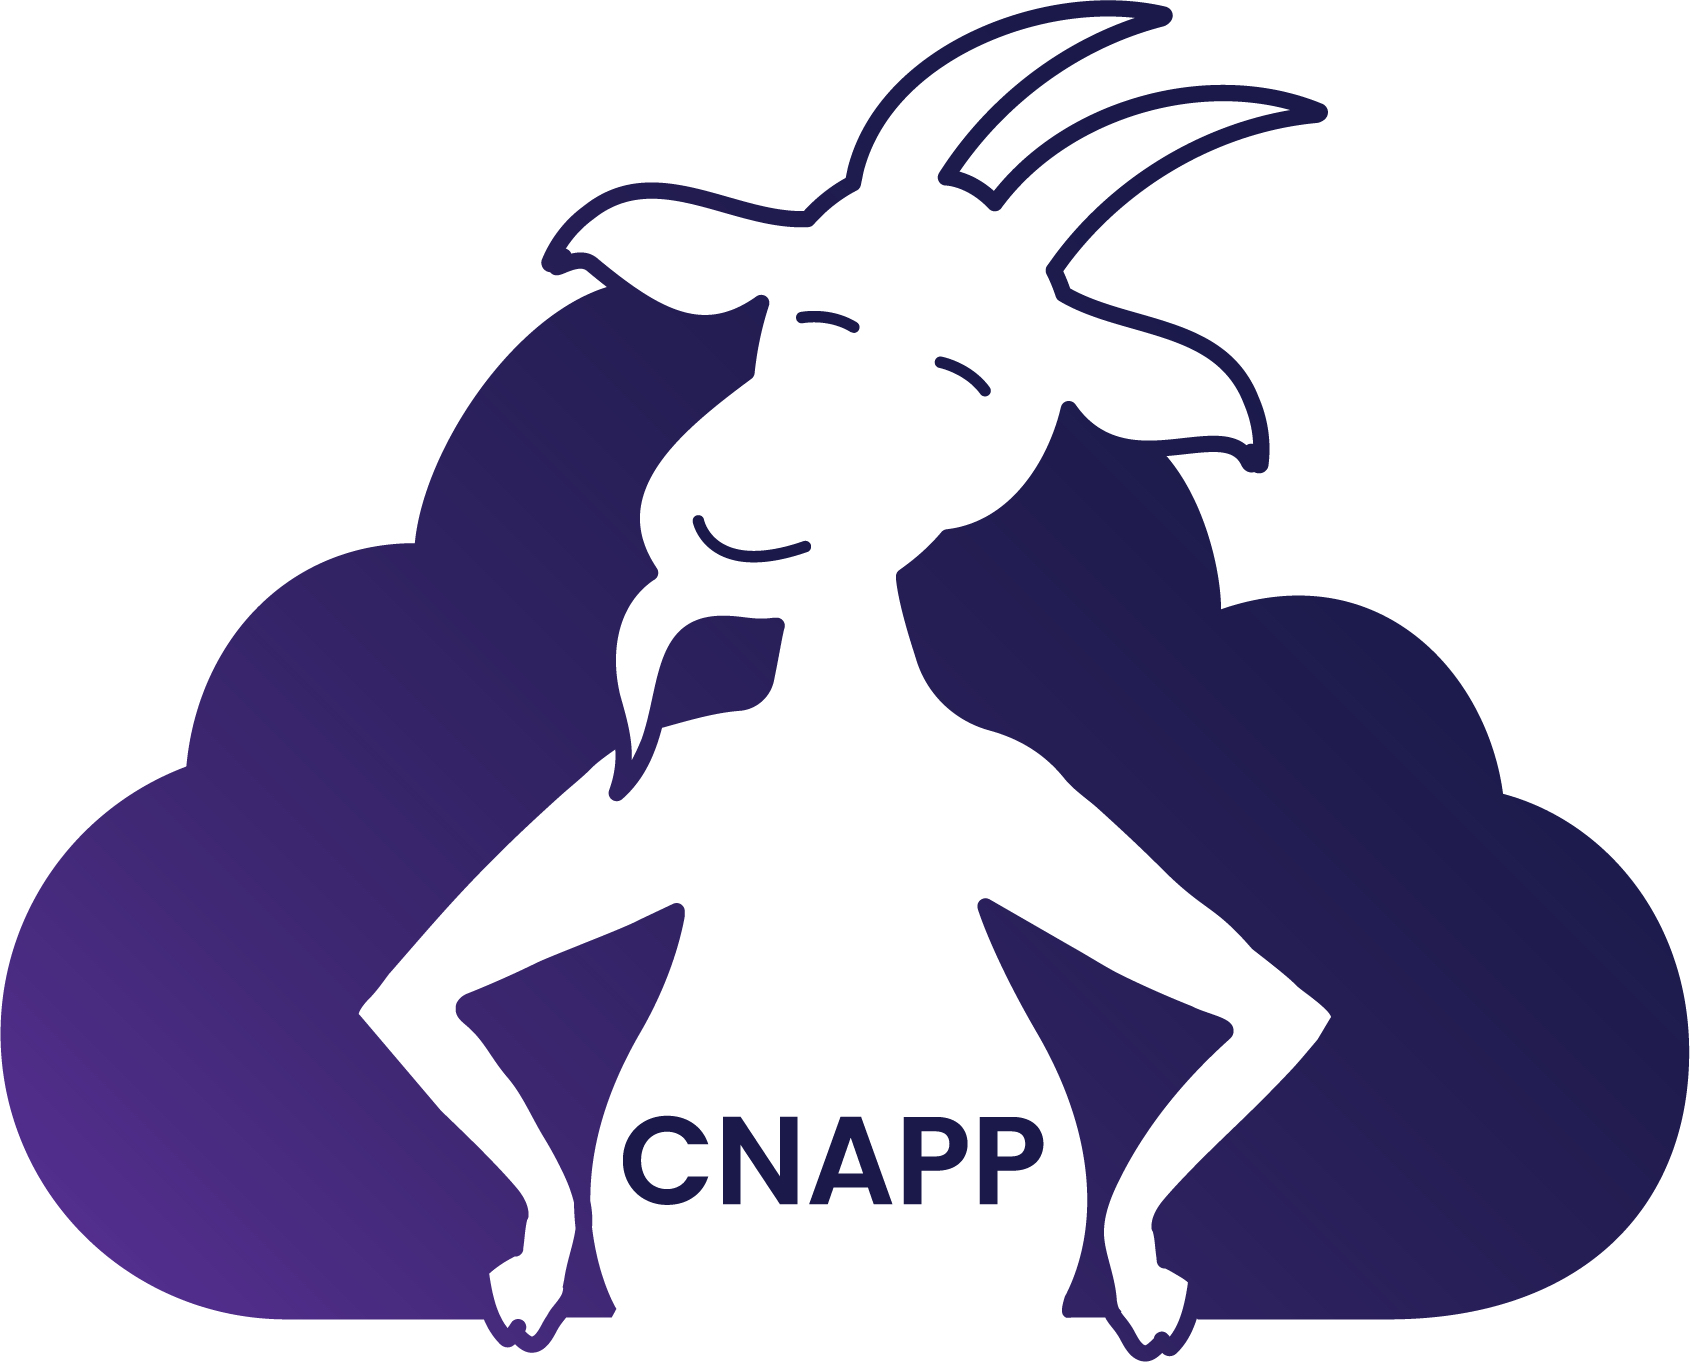 CNAPPGoat logo: a smiling goat with a purple cloud background